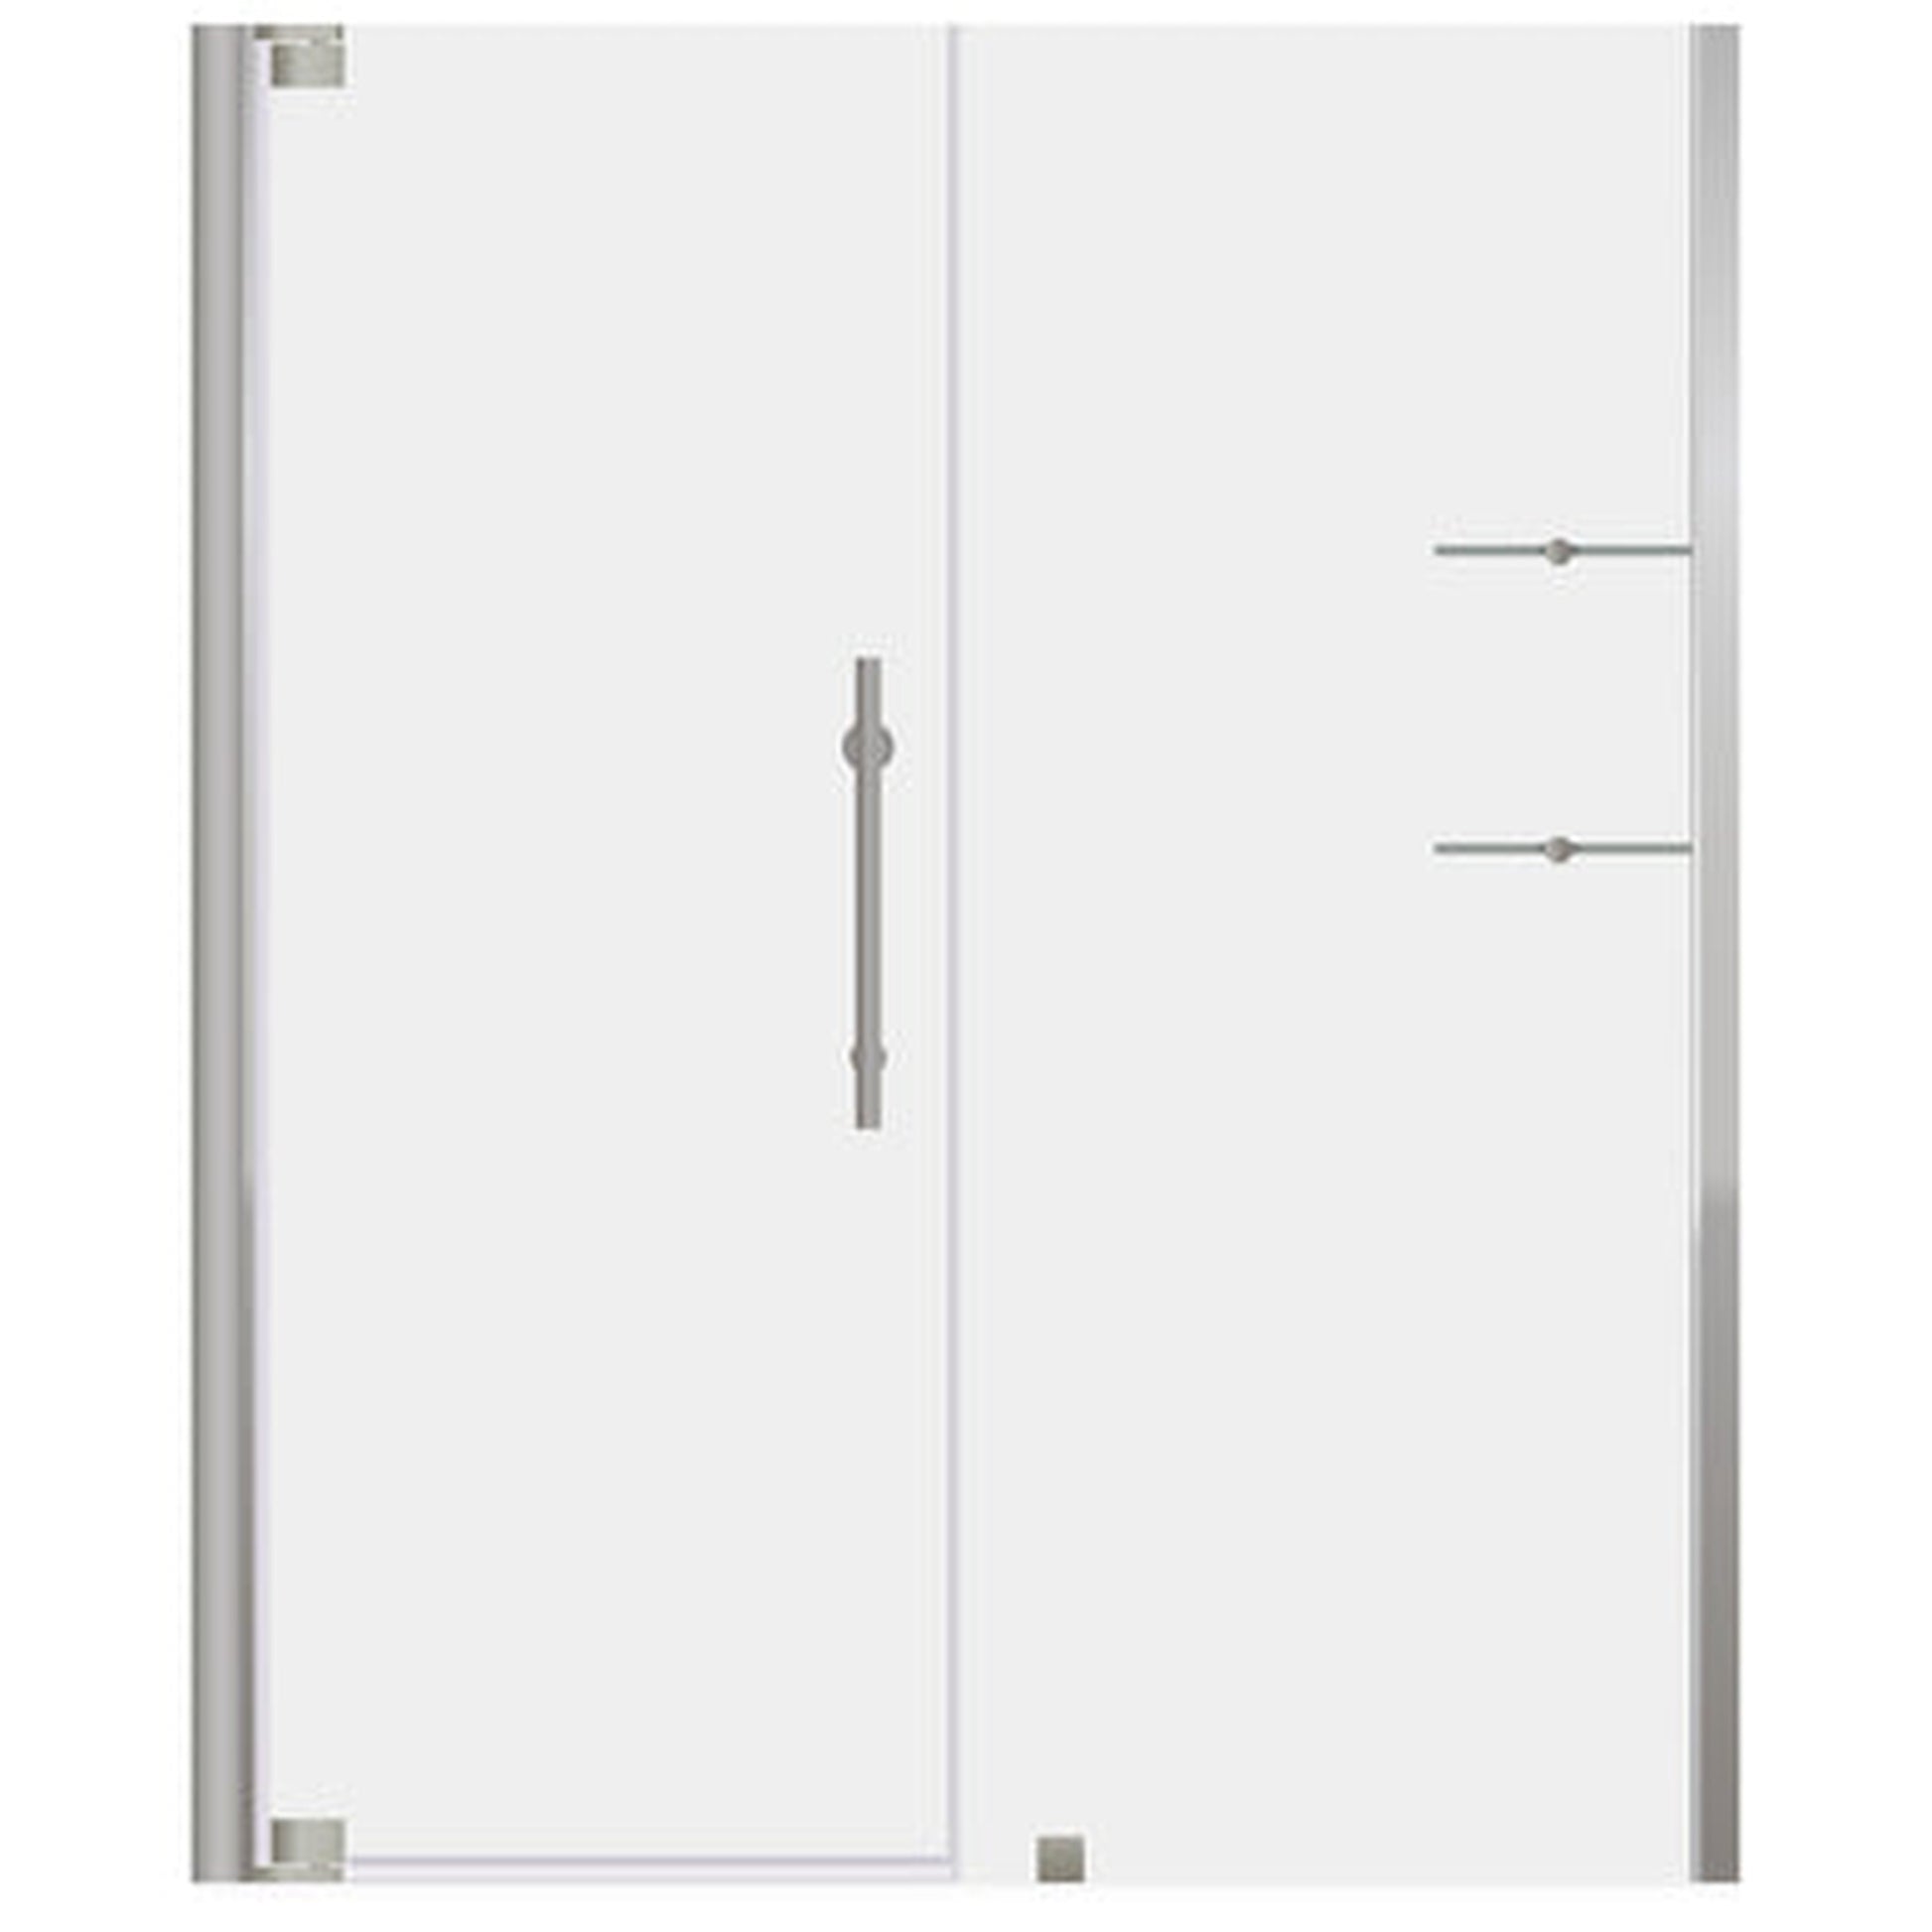 LessCare Ultra-G 68-70" x 72" Brushed Nickel Swing-Out Shower Door